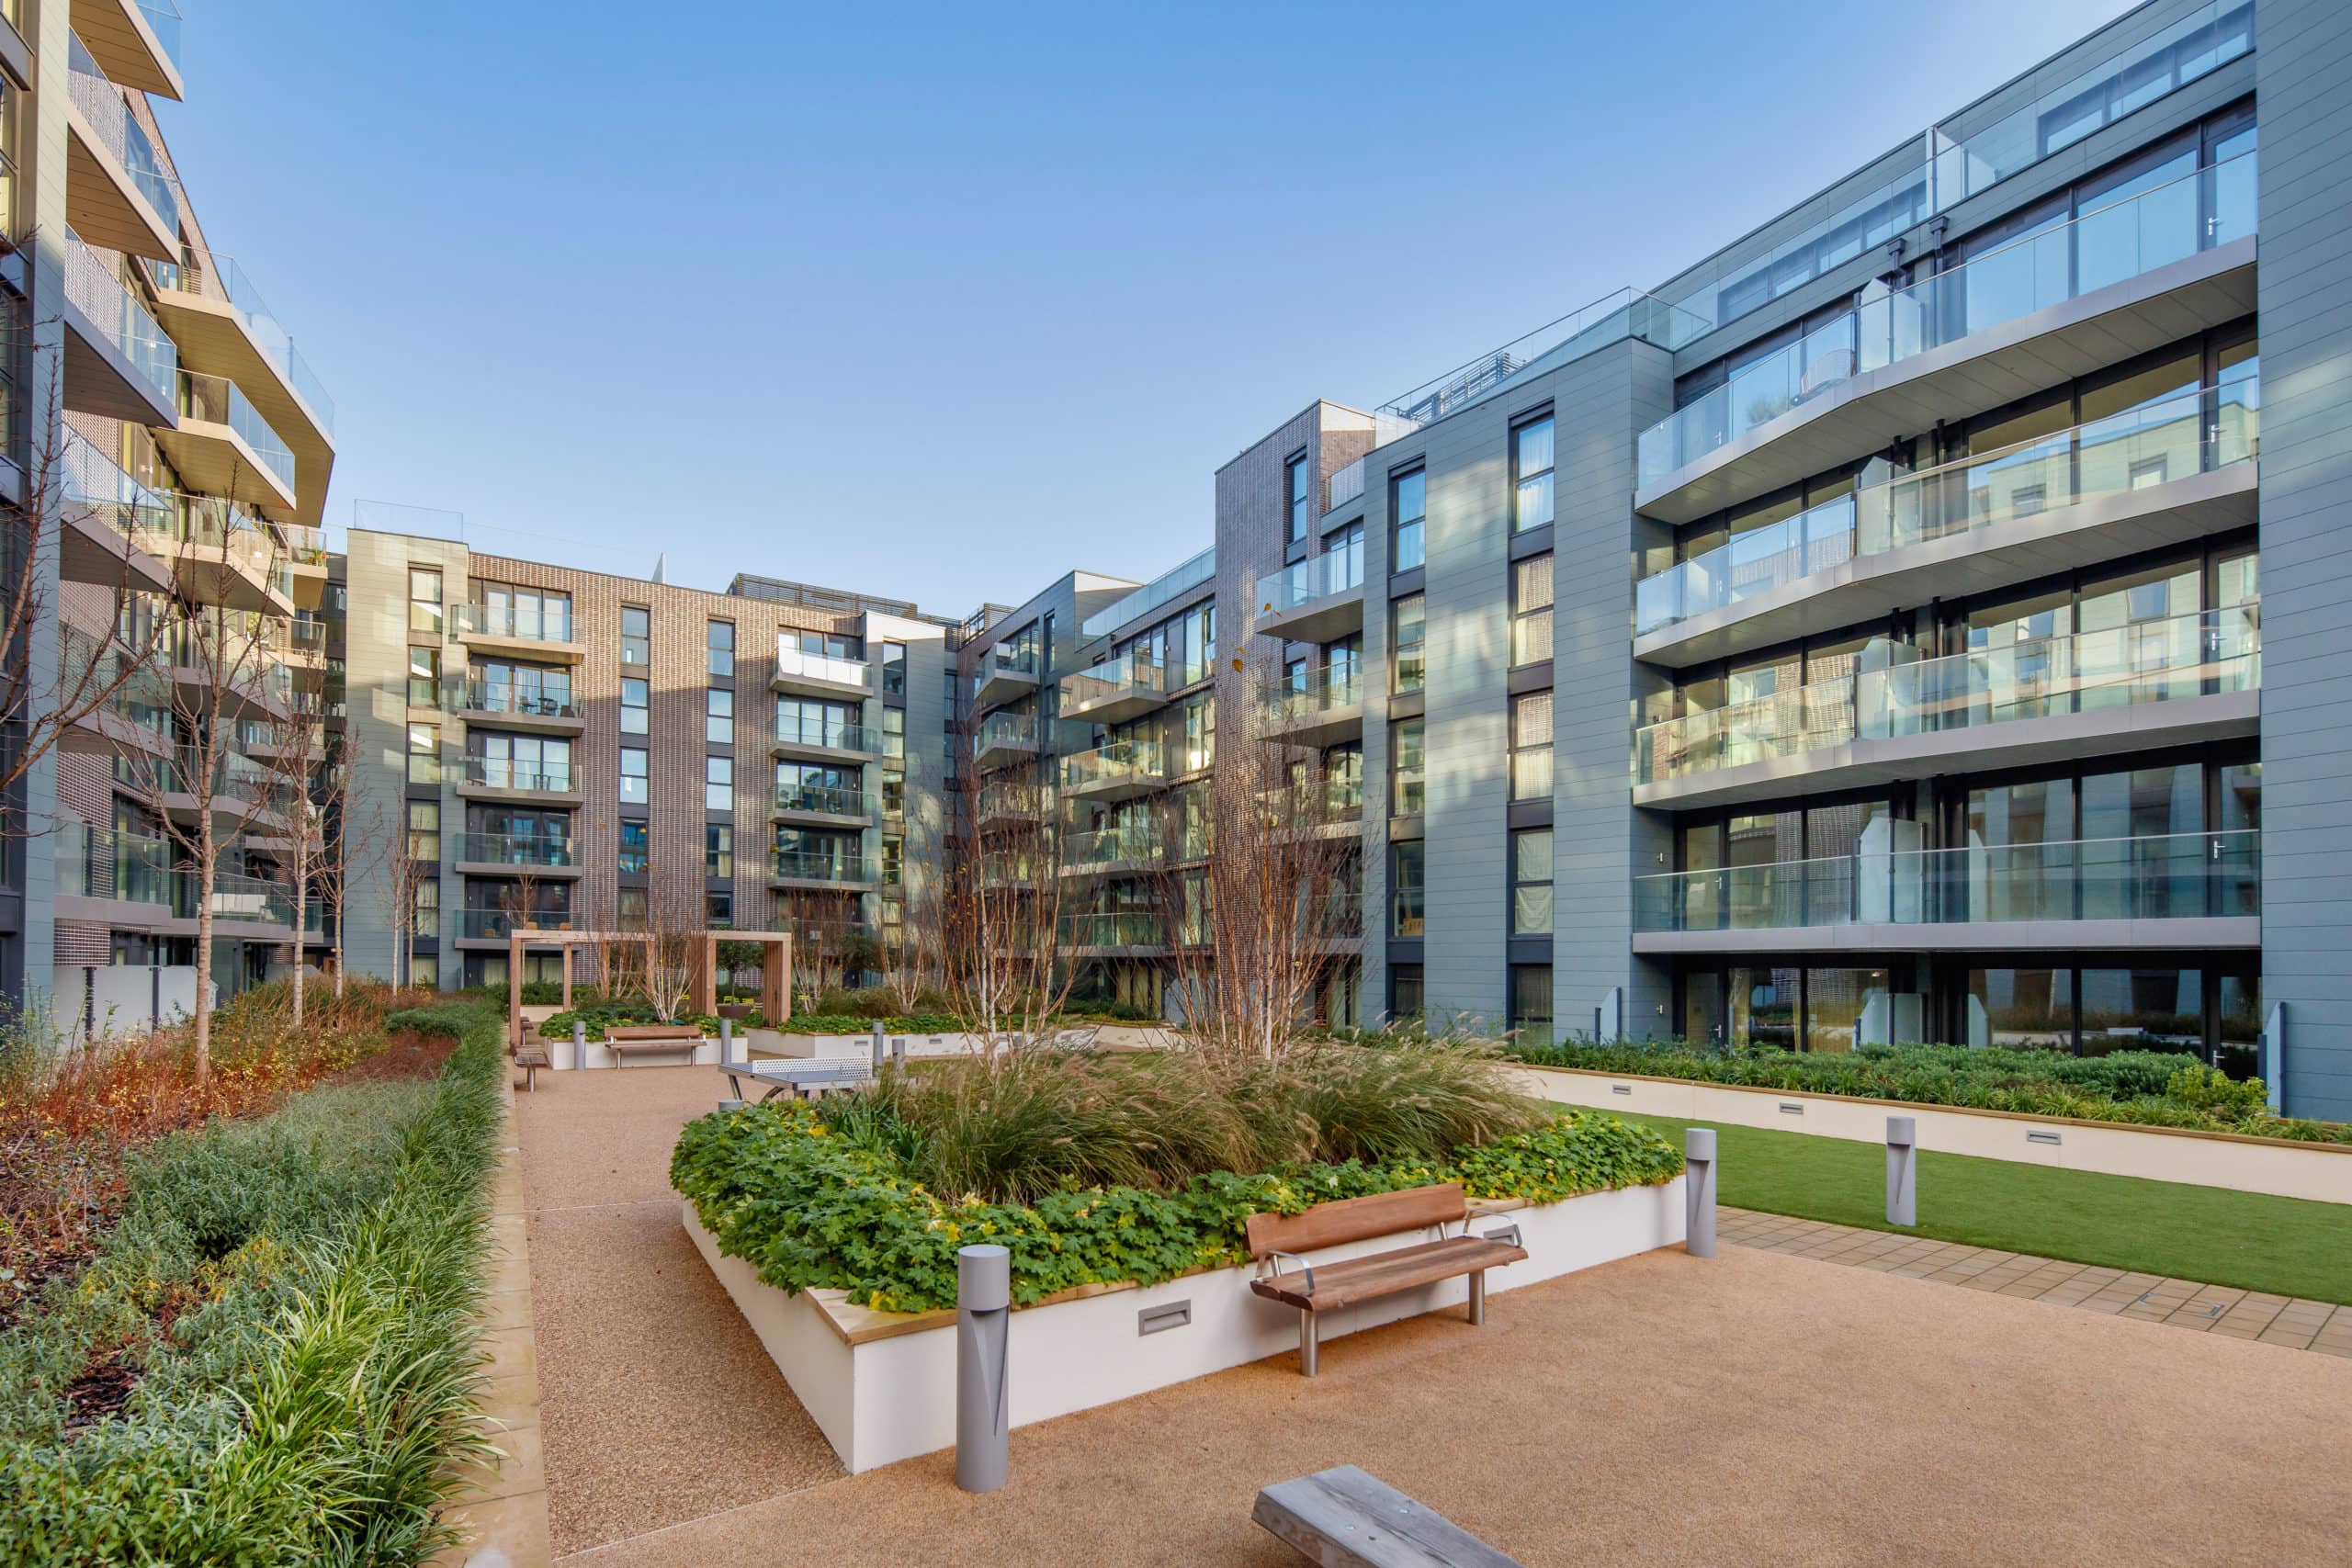 L&Q at Greenwich Square Exterior - Shared Ownership homes available on Share to Buy